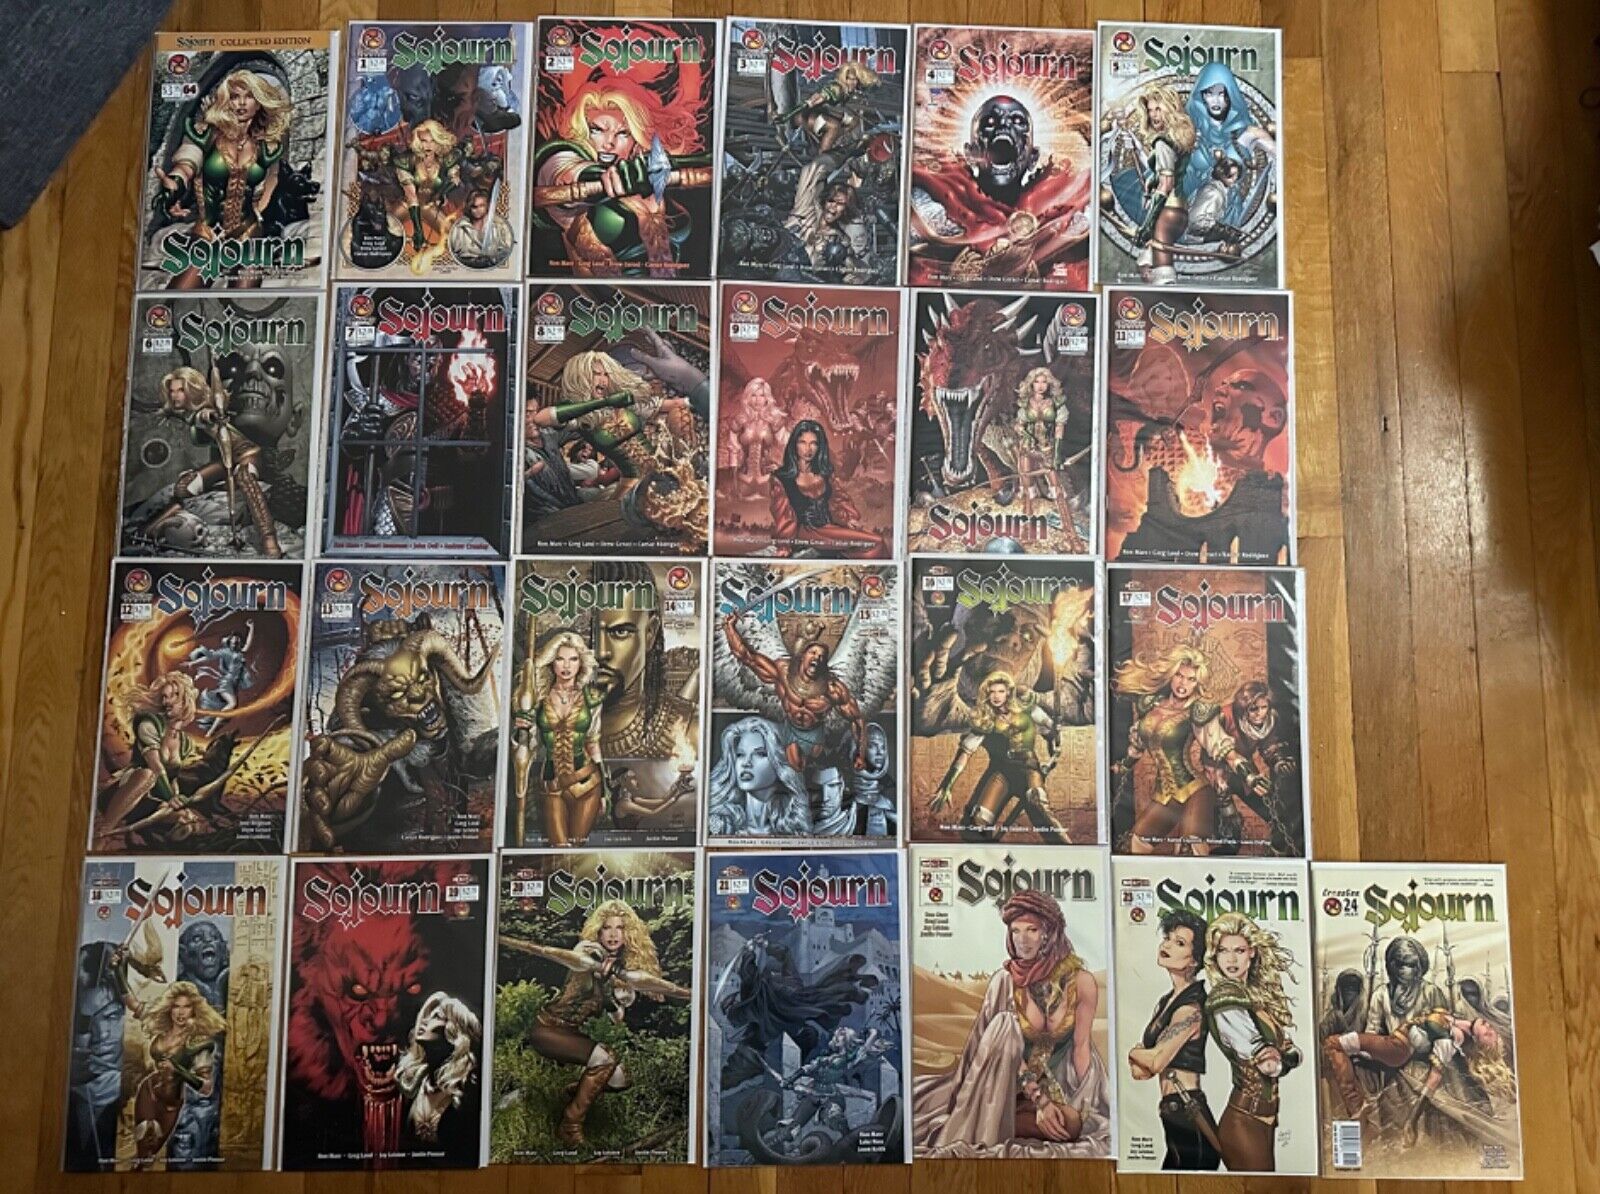 Sojurn #1-24 and Collected Edition - Stunning Greg Land artwork